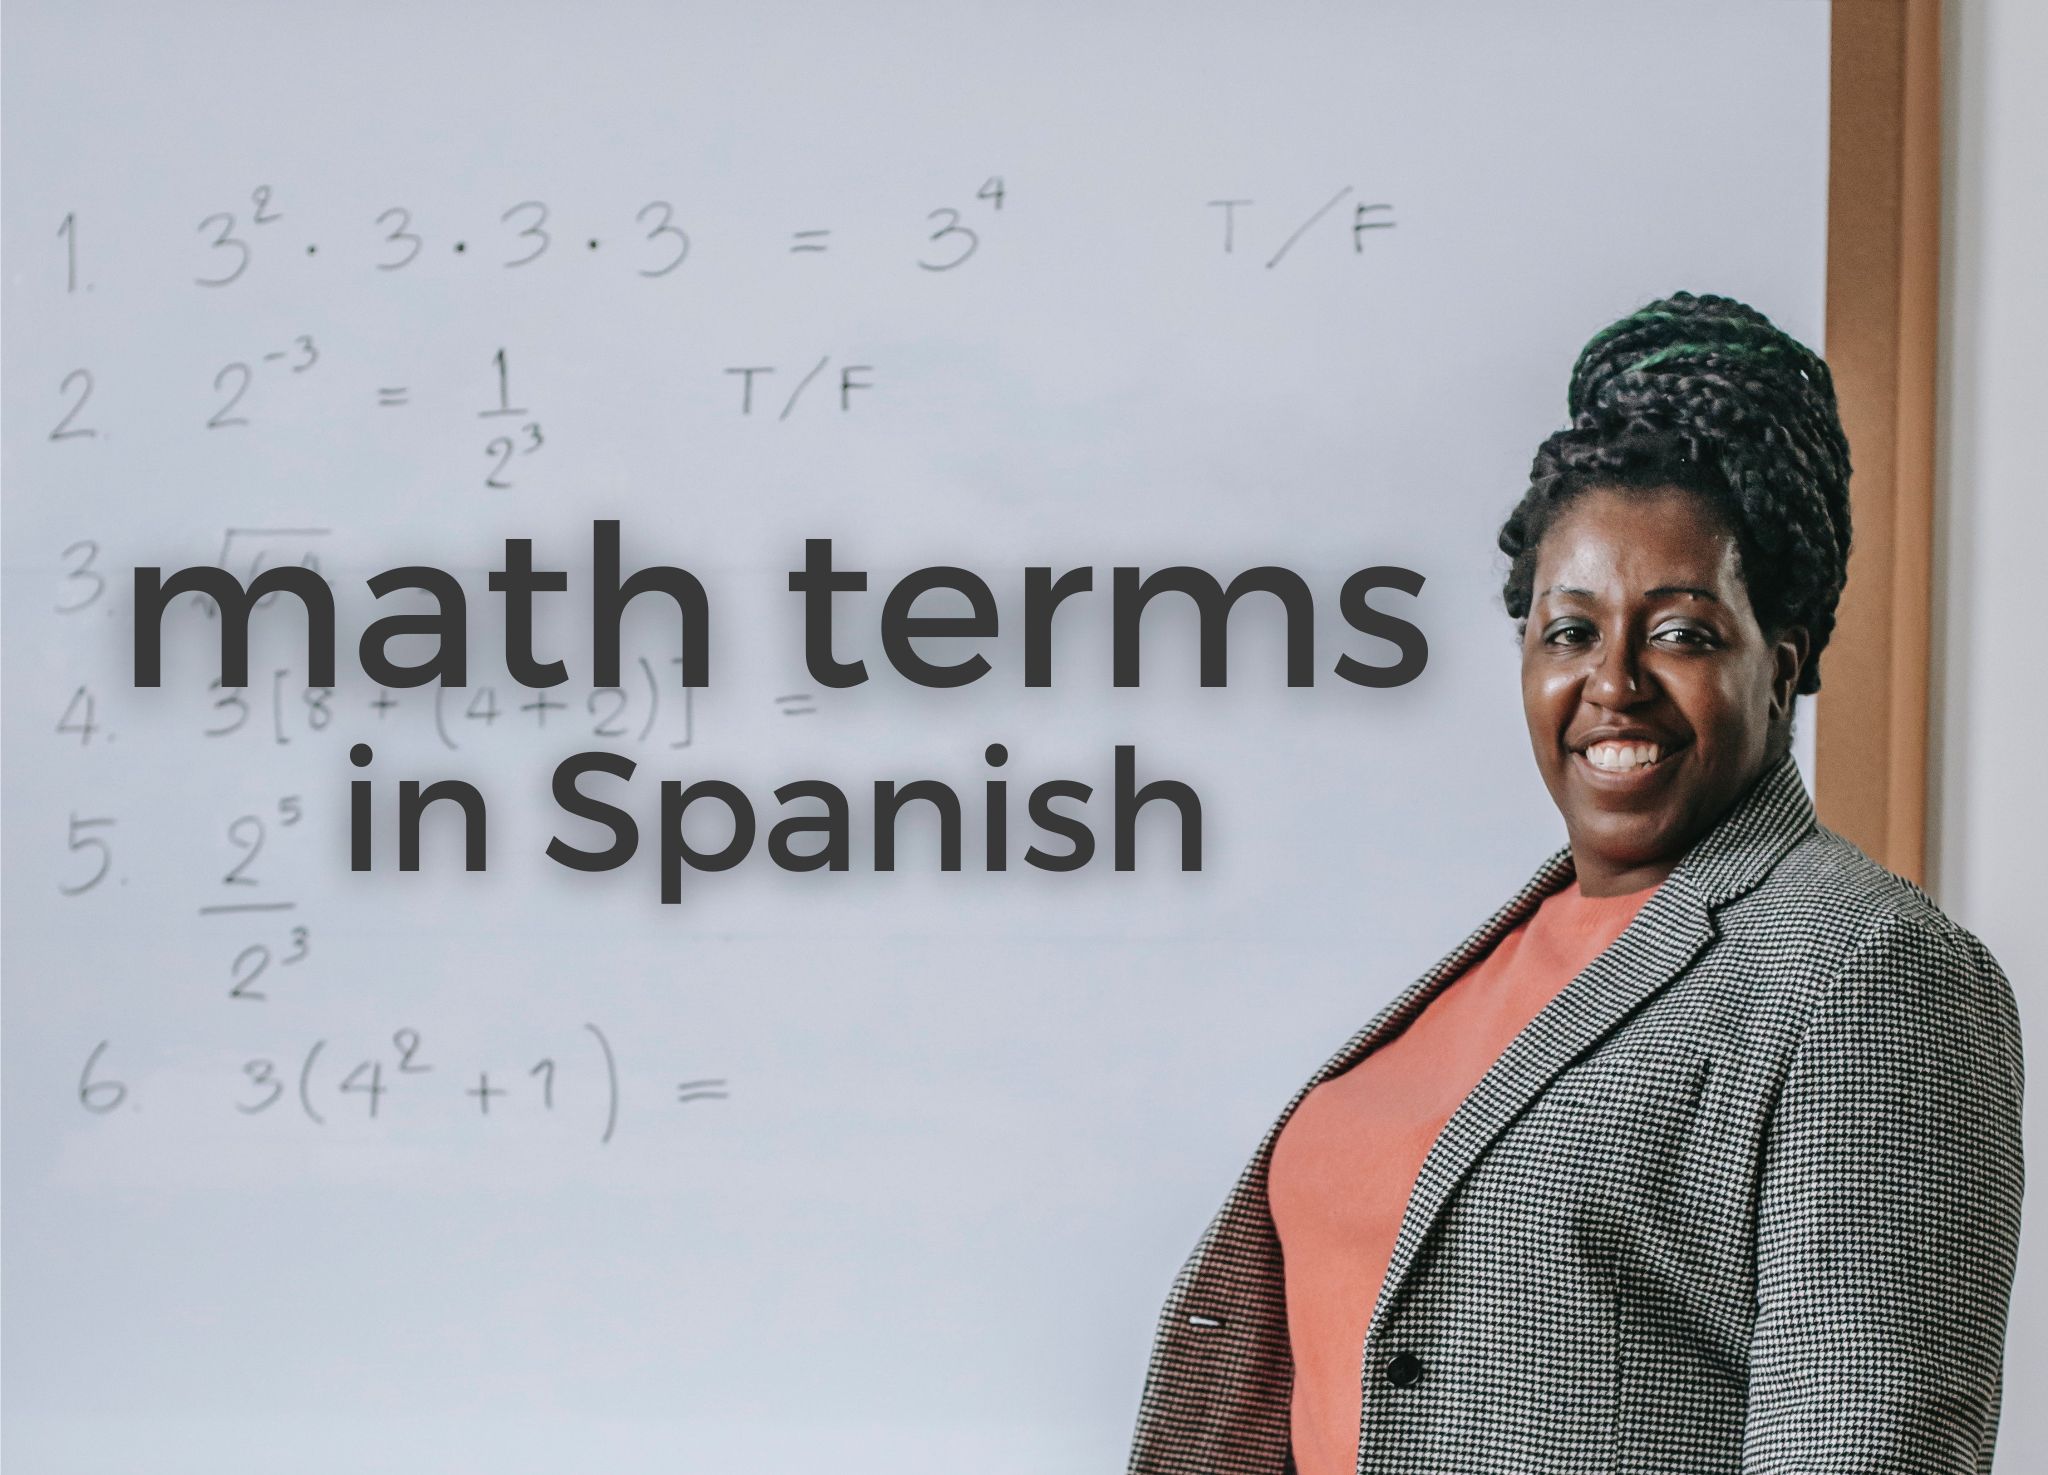 Terms for math in Spanish